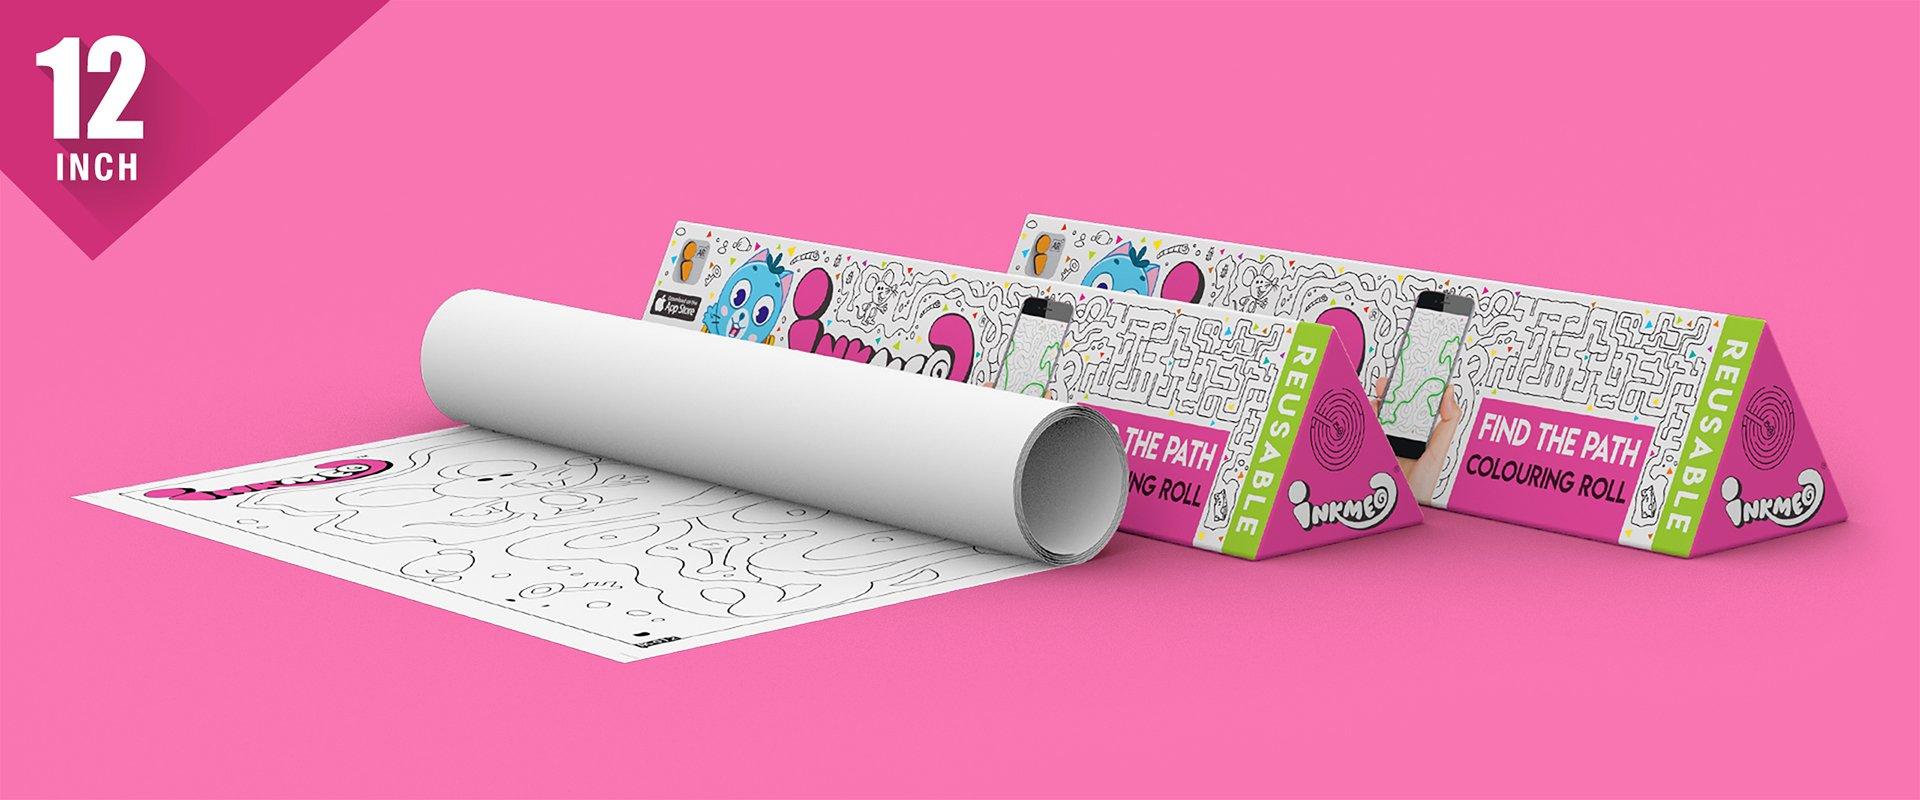 Find the Path Colouring Roll (12 inch) - Inkmeo